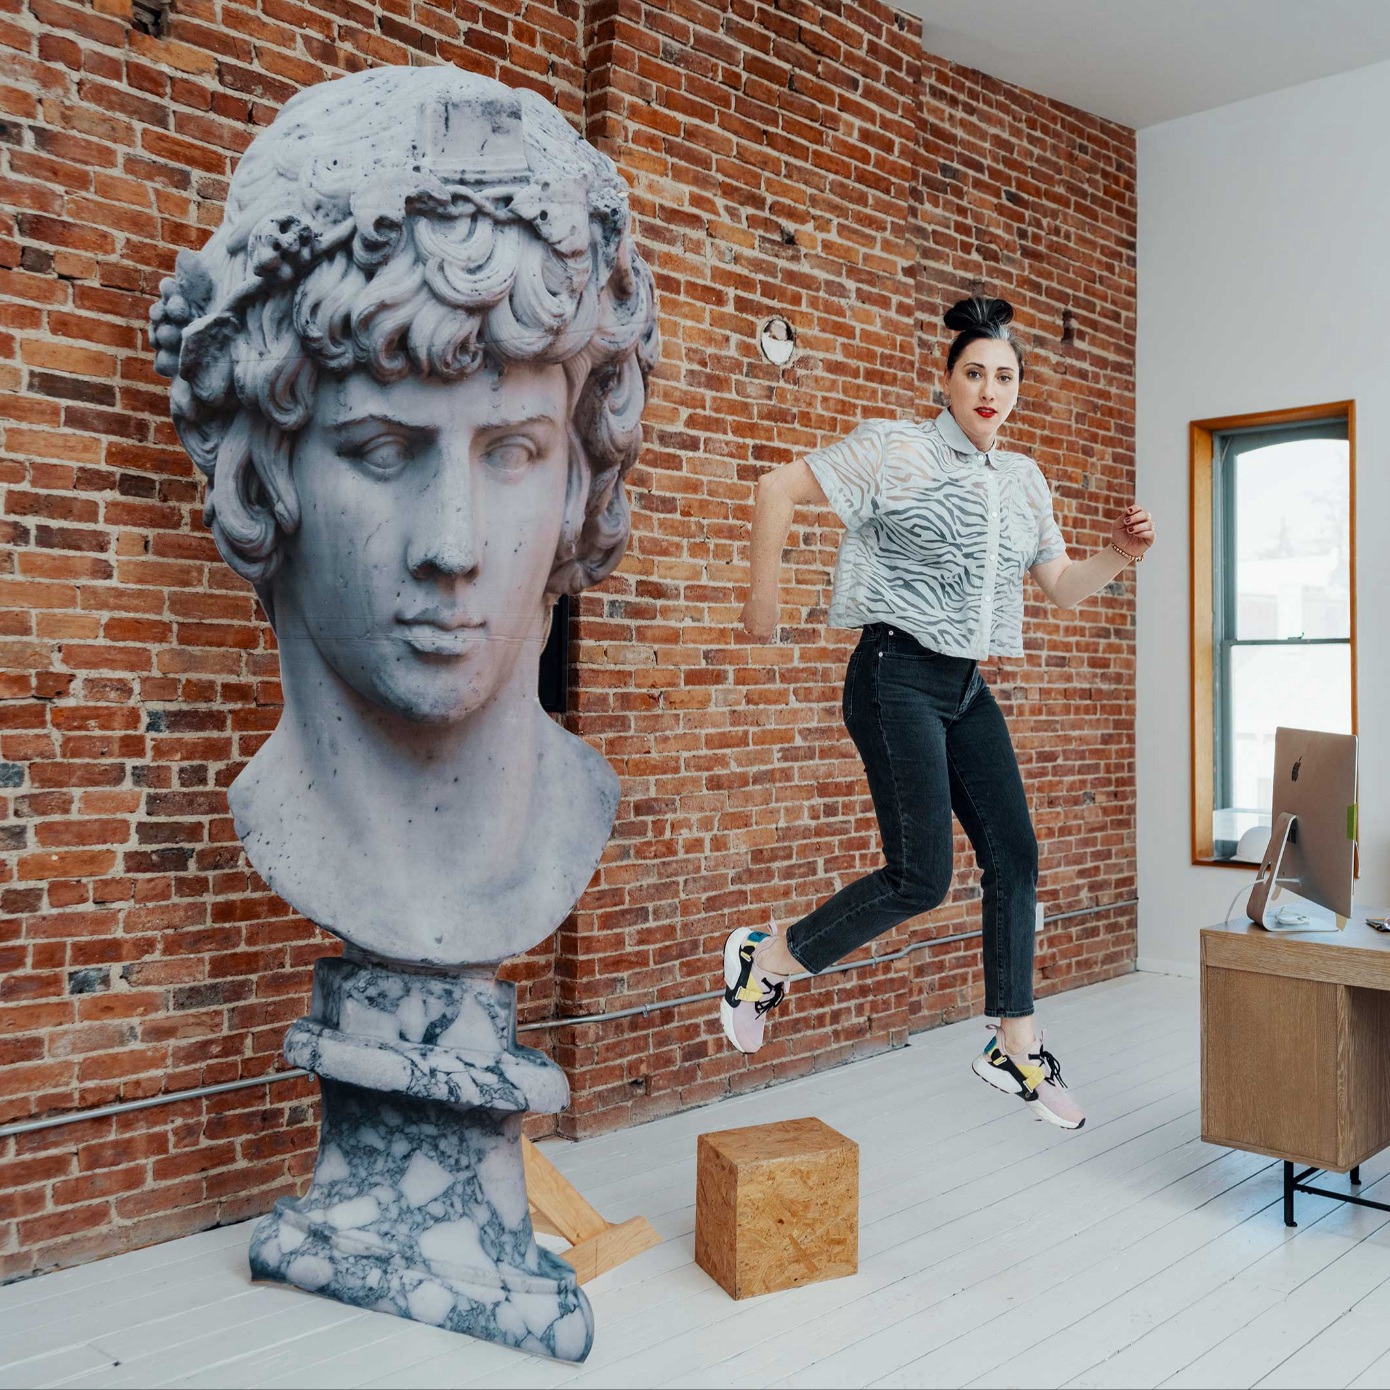 woman jumping in office